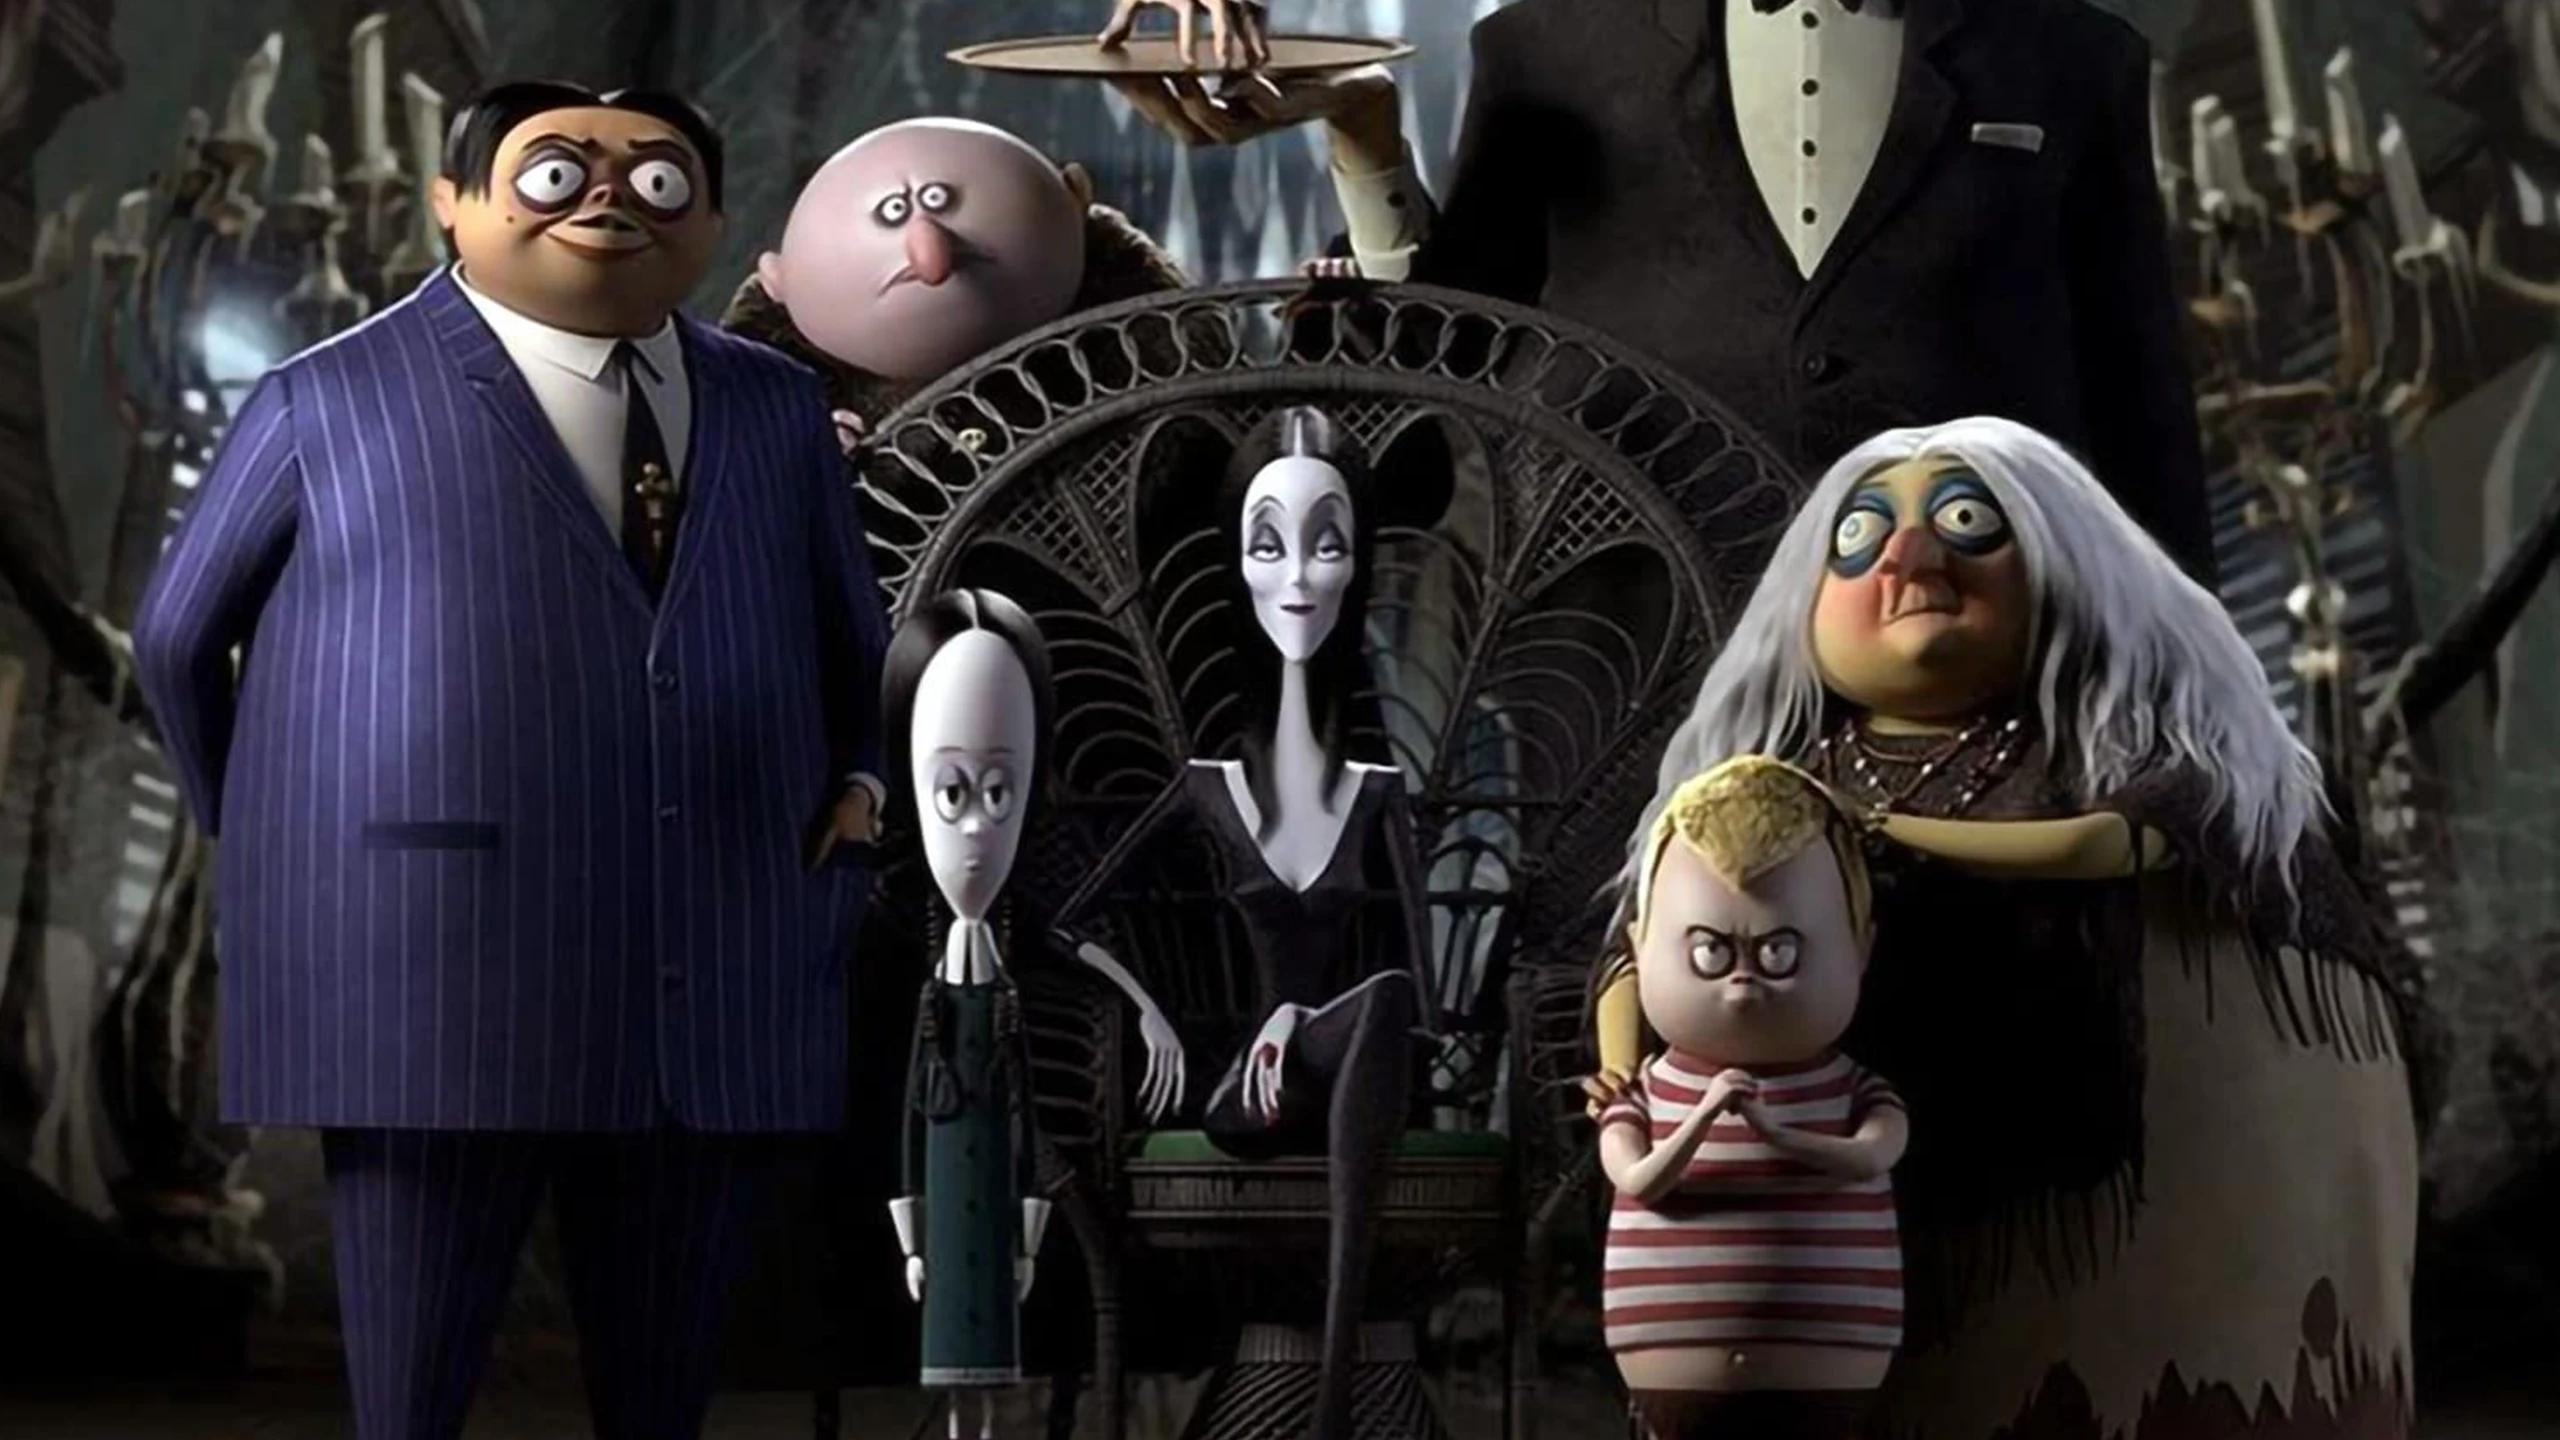 The Addams Family 2 (2021) - Wednesday and fam hit the road